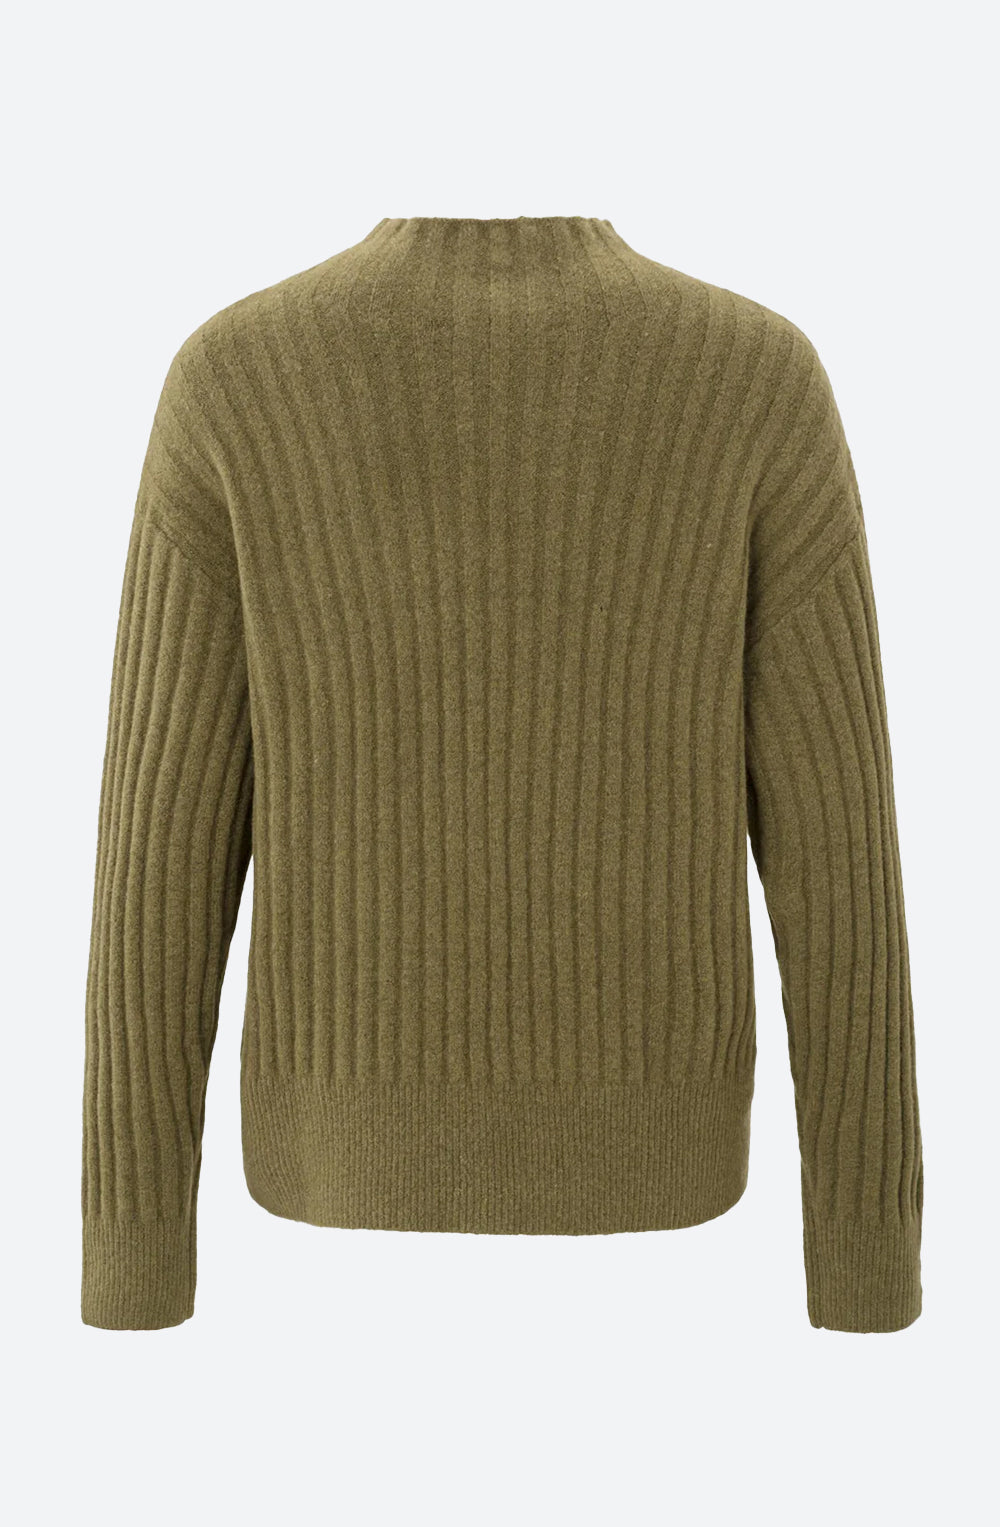 Sweater with Turtleneck in Gothic Olive Green Melange